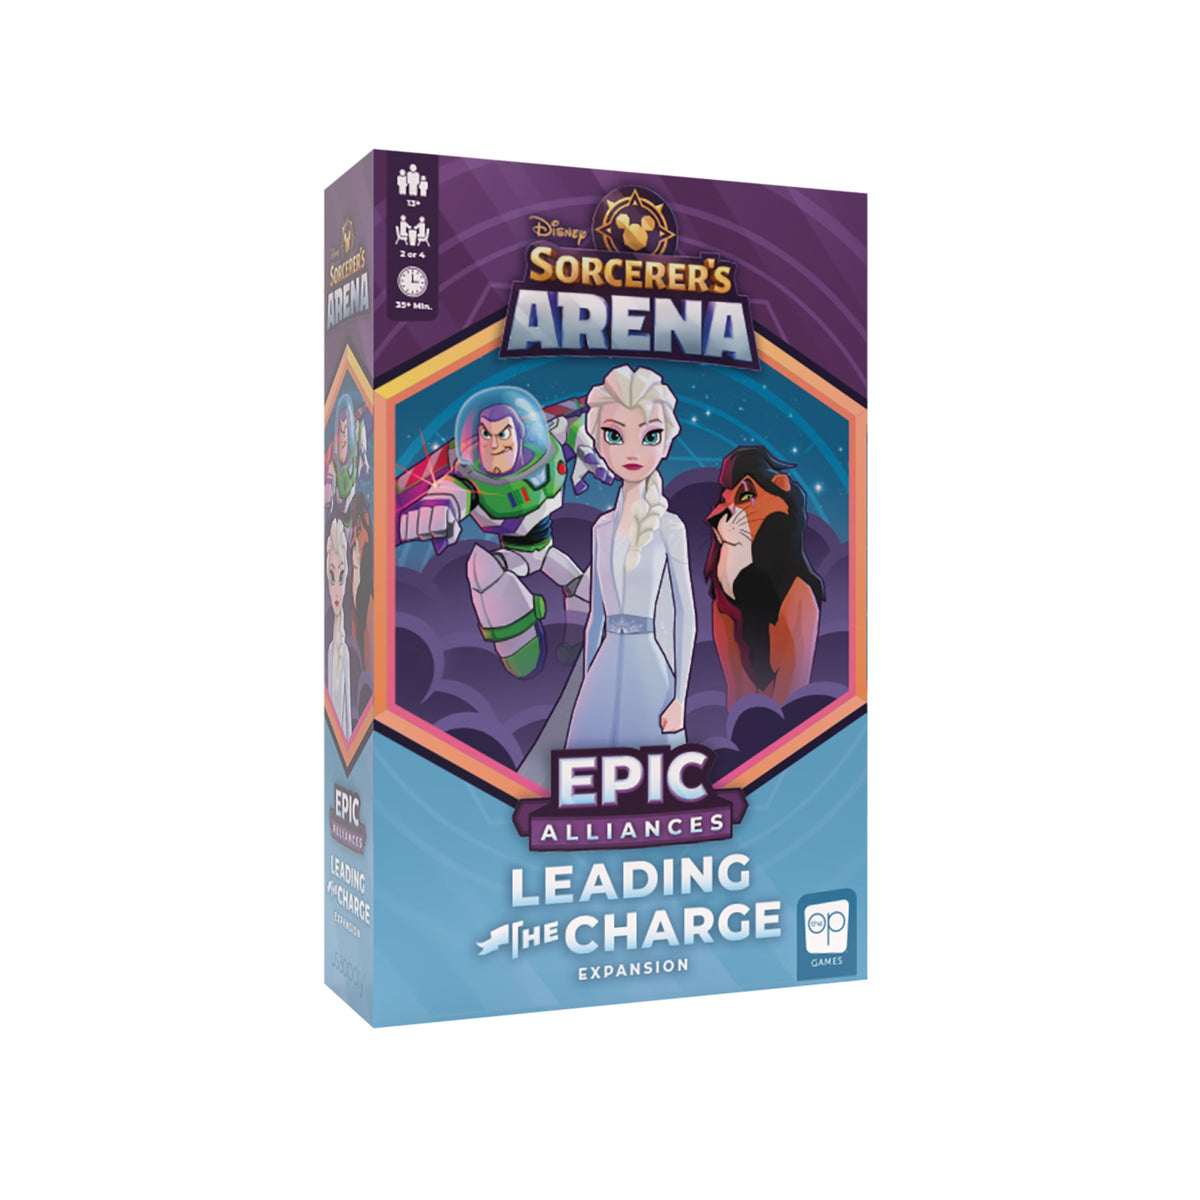 Disney Sorcerers Arena Epic Alliances Leading the Charge Expansion